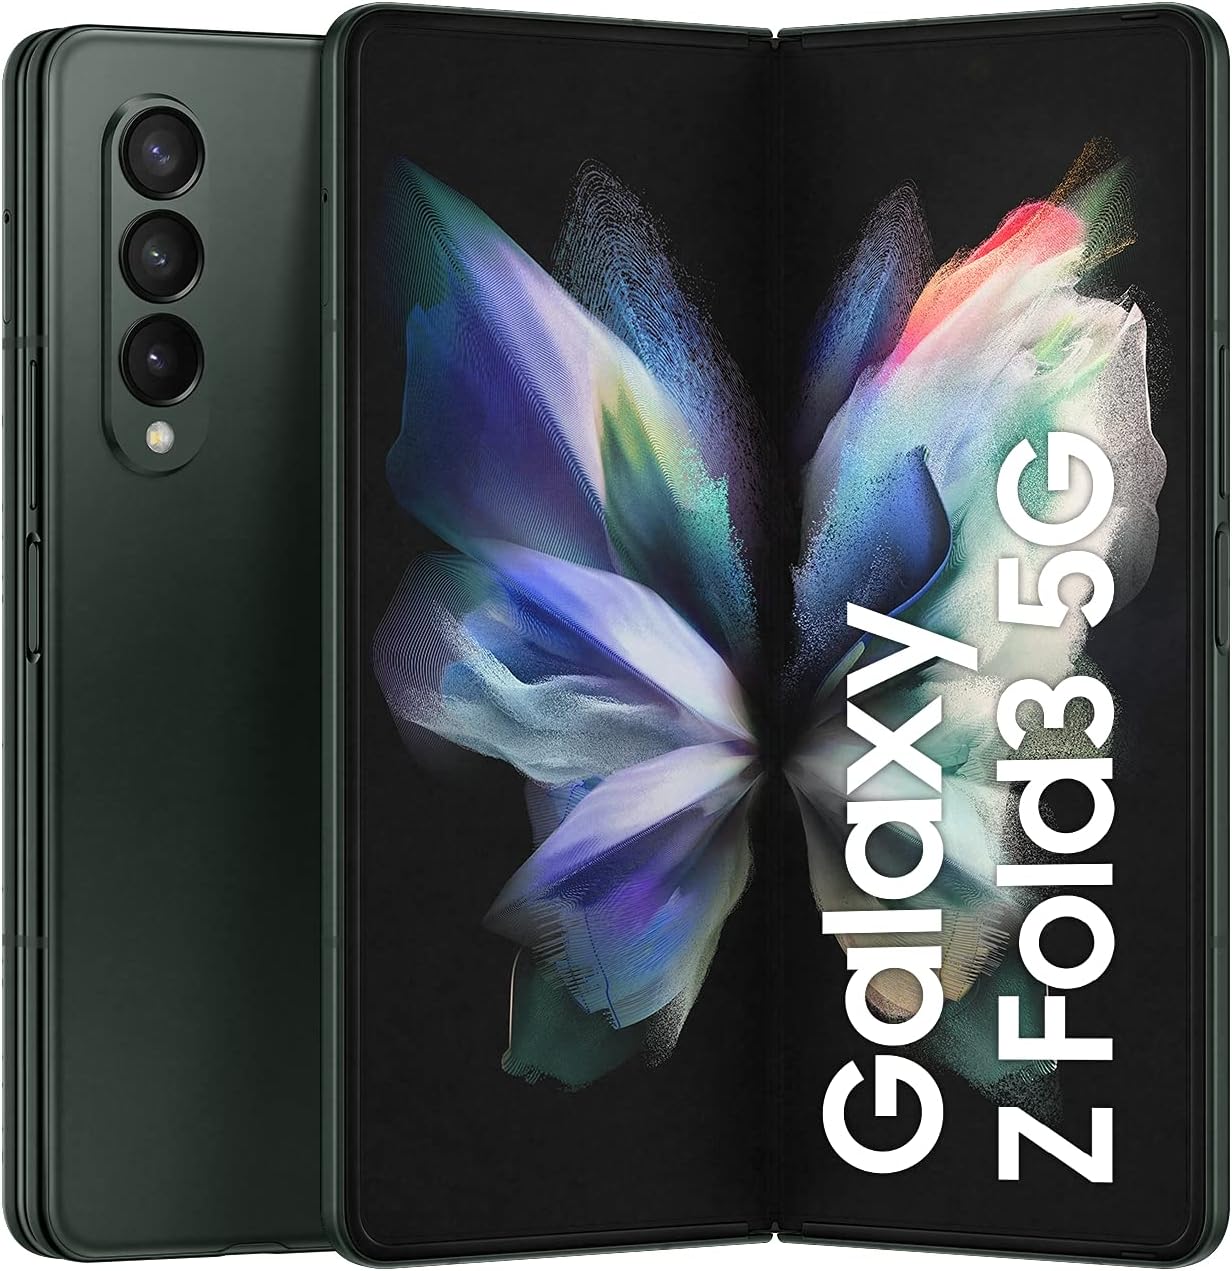 SAMSUNG Galaxy Z Fold3 5G in Phantom Green - Shape of tomorrow’s design, now more portable and durable. 8806092562462